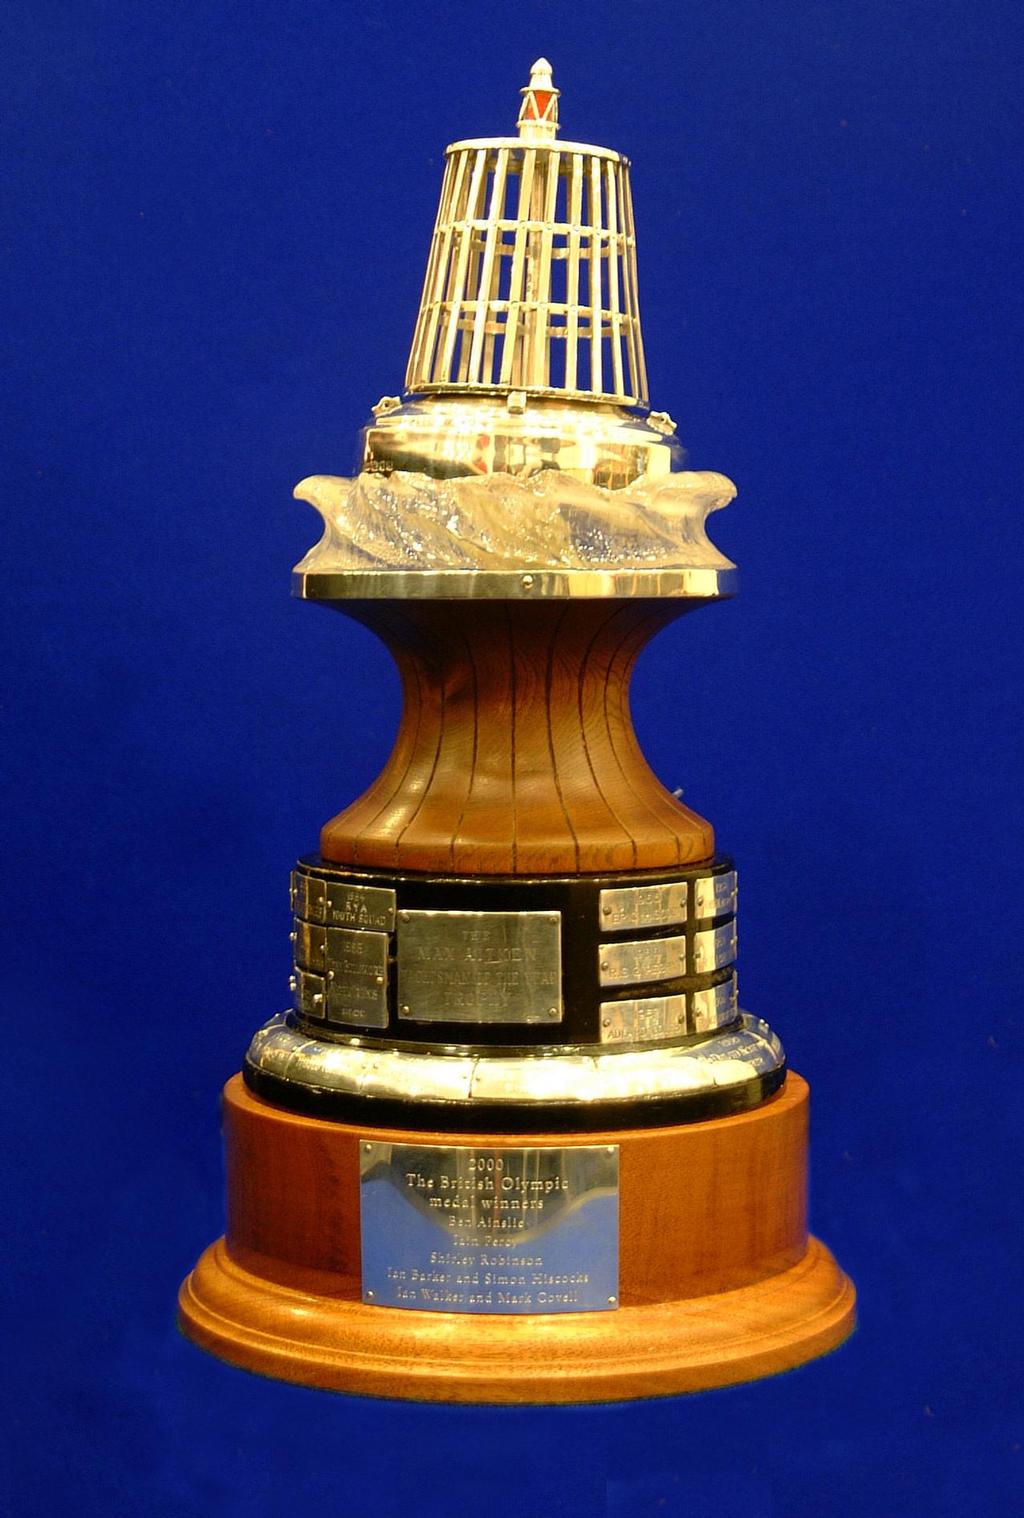 Paul_Gelder_The Yachtsman of the Year trophy, first won in 1955 by Eric Hiscock © Paul Gelder